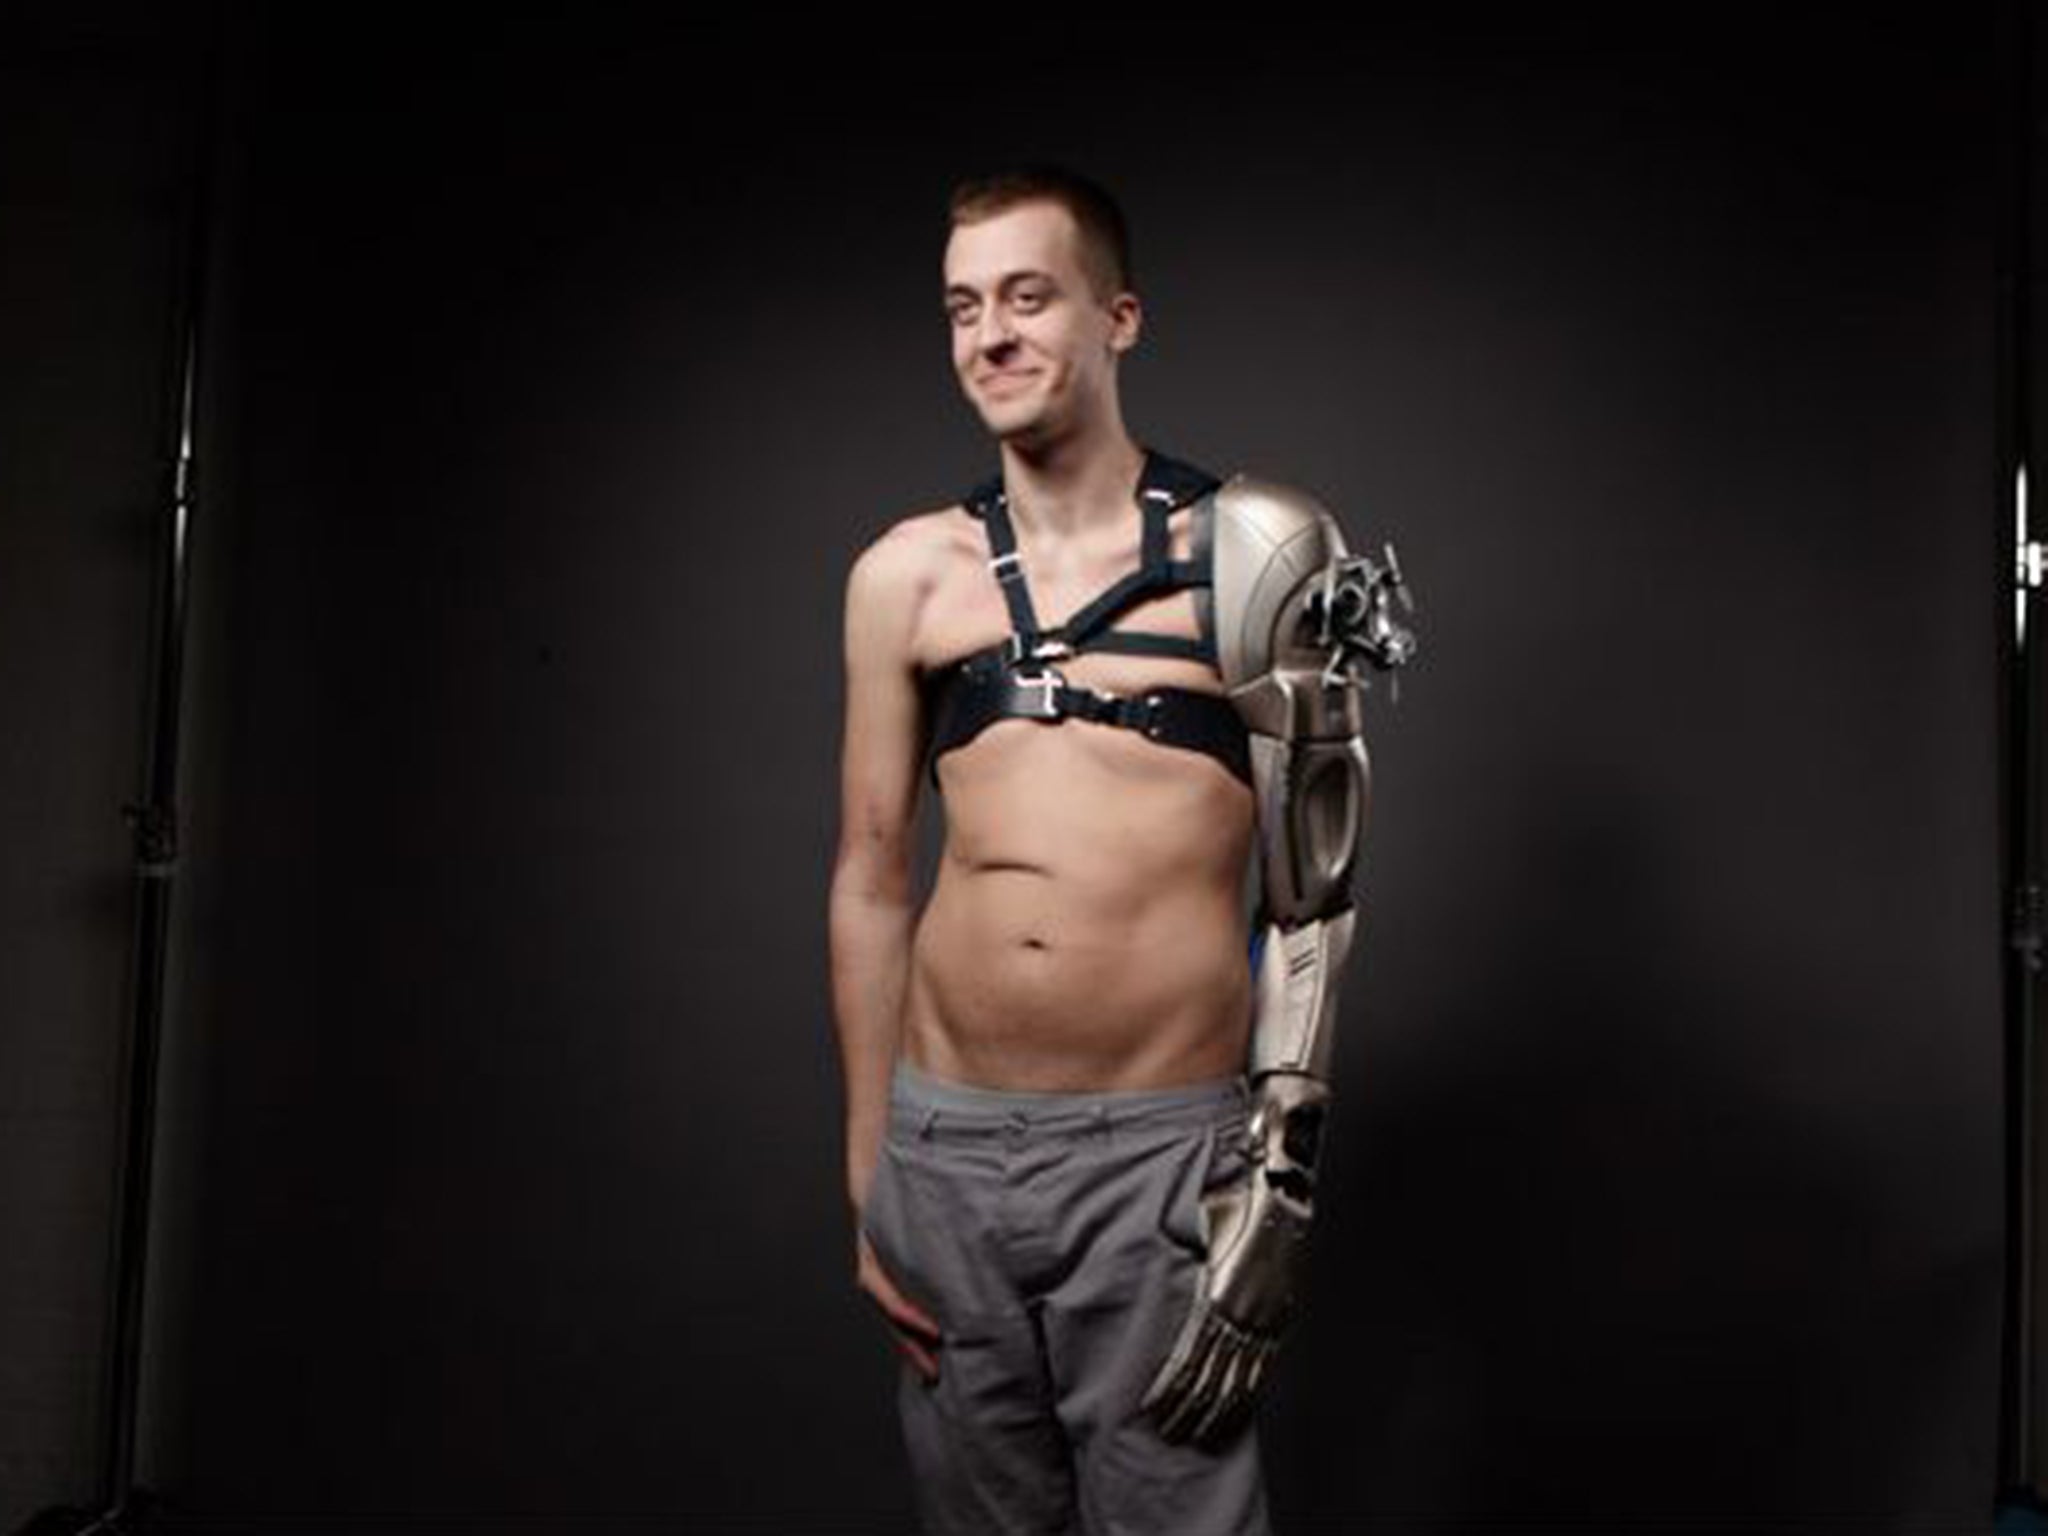 Prosthetics: Amputee James Young unveils hi-tech synthetic arm